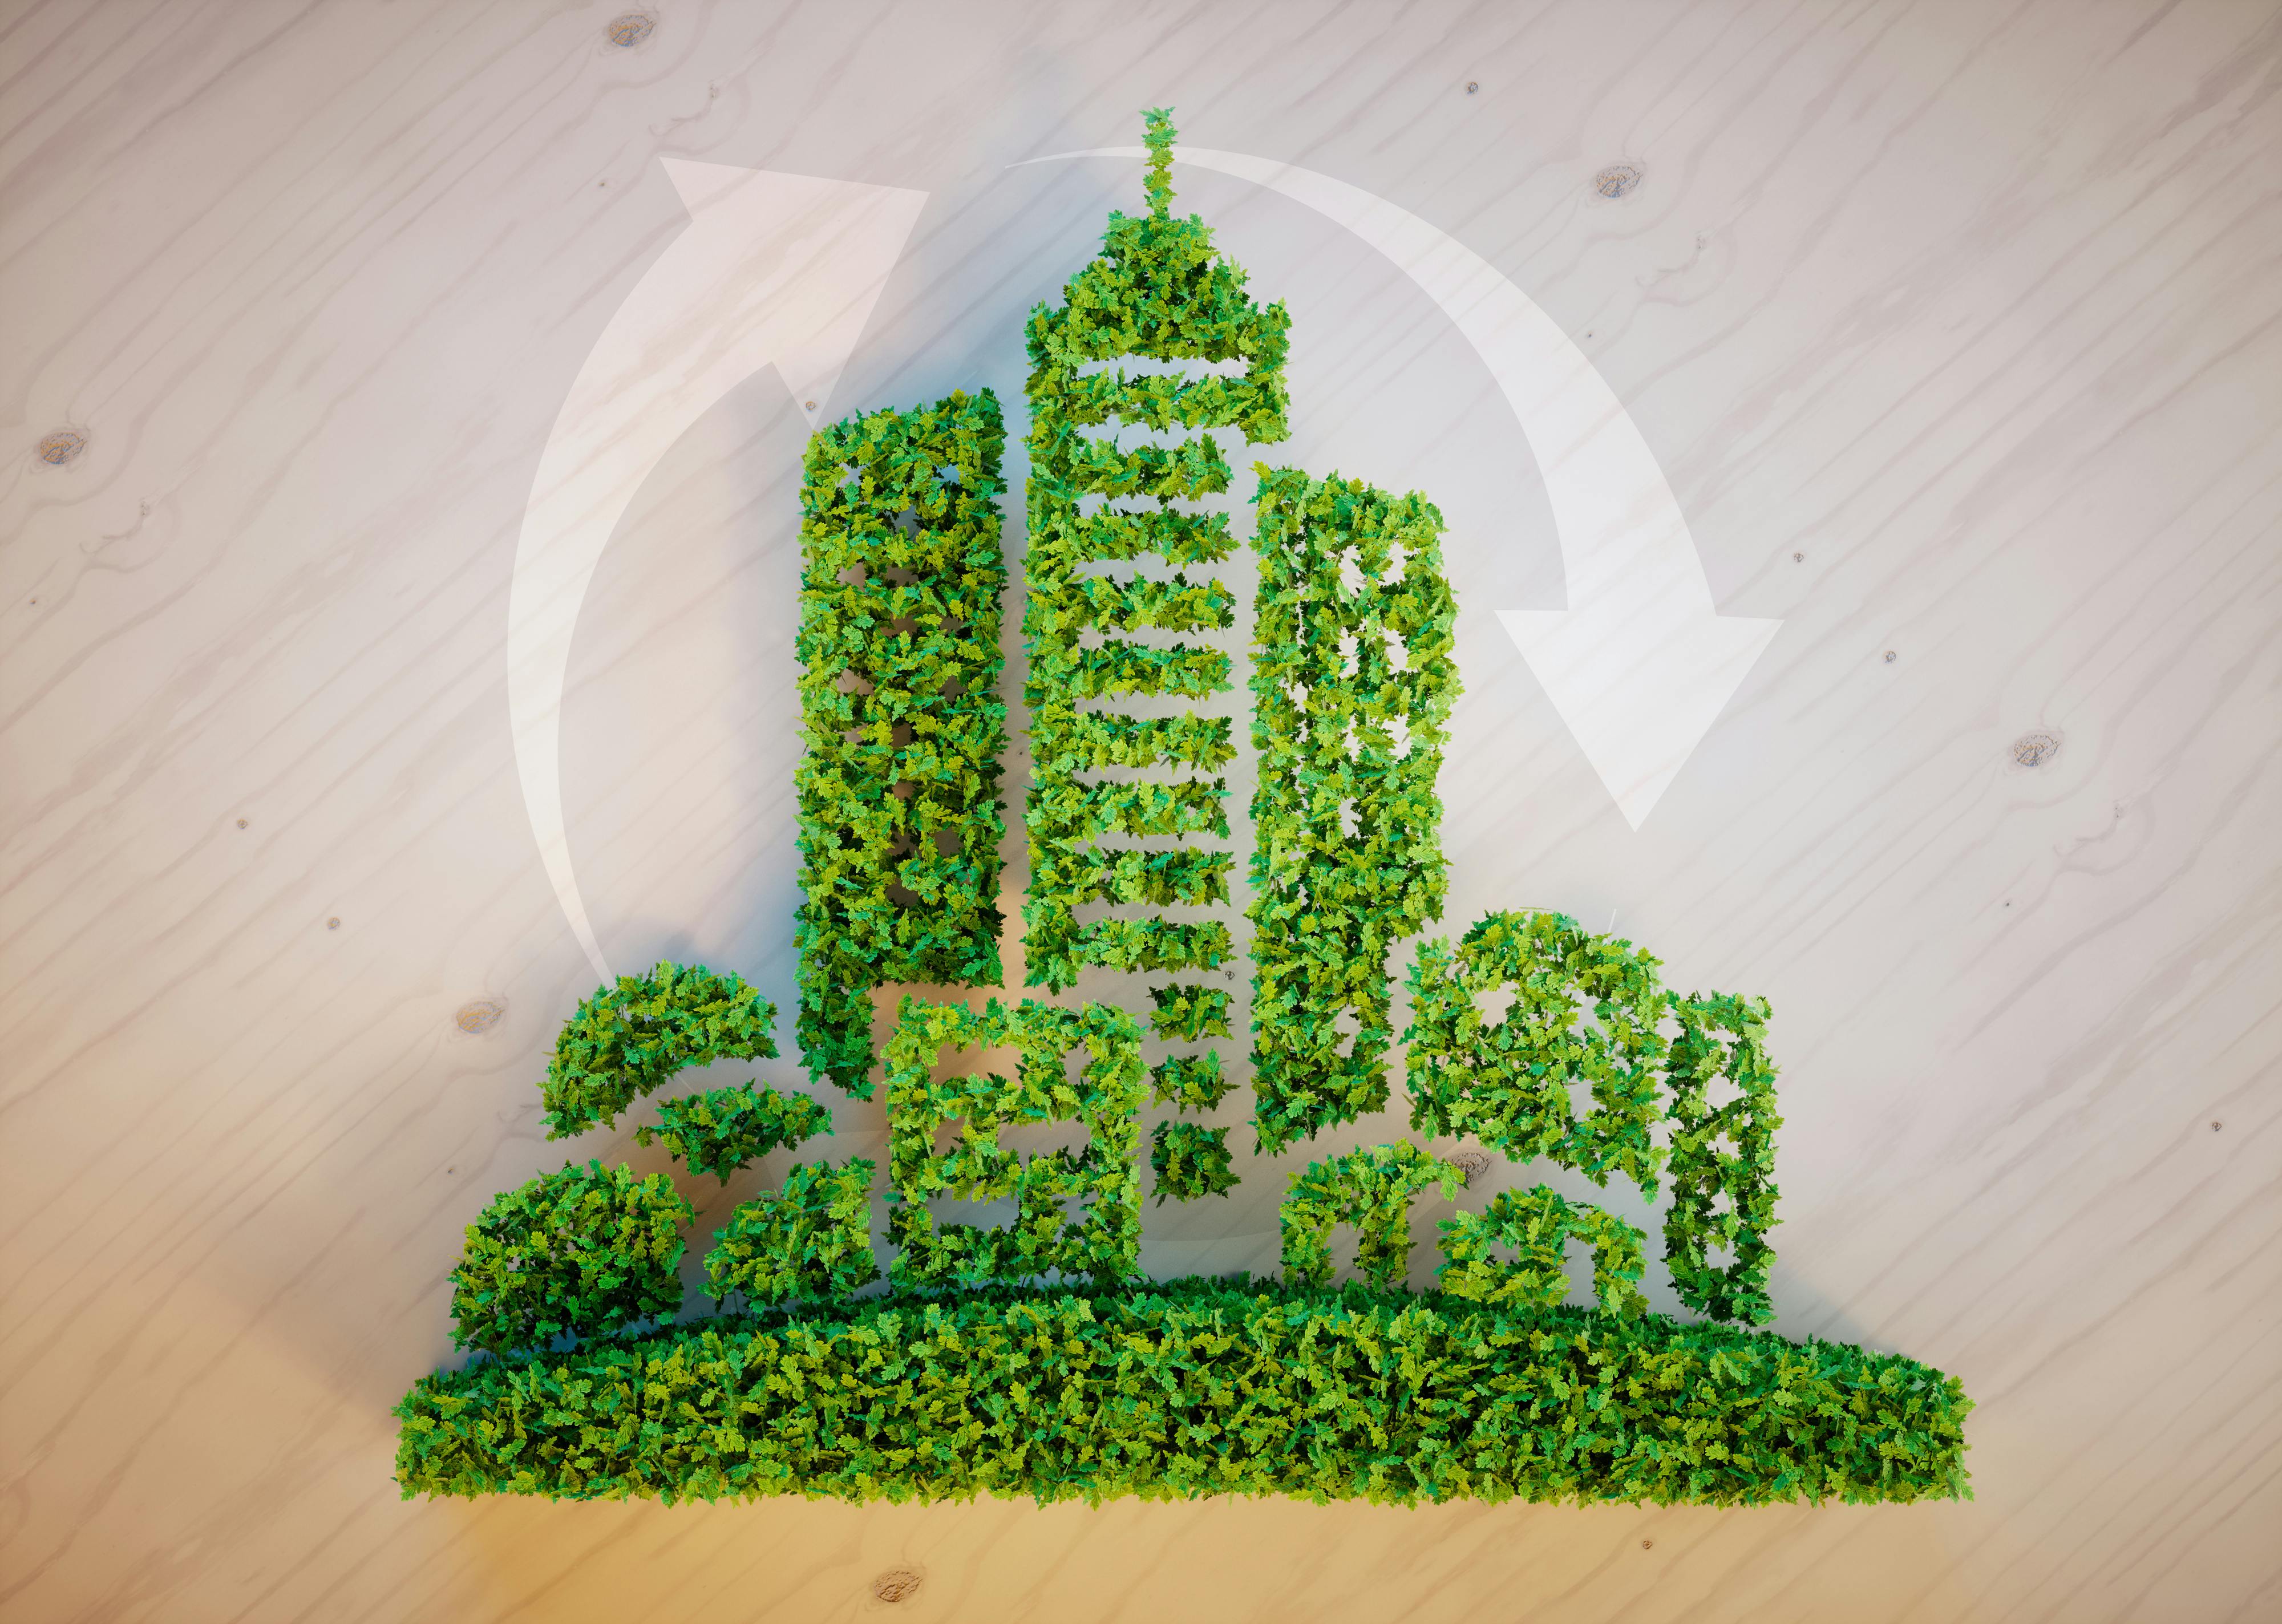 Sustainability, Building, City, Green